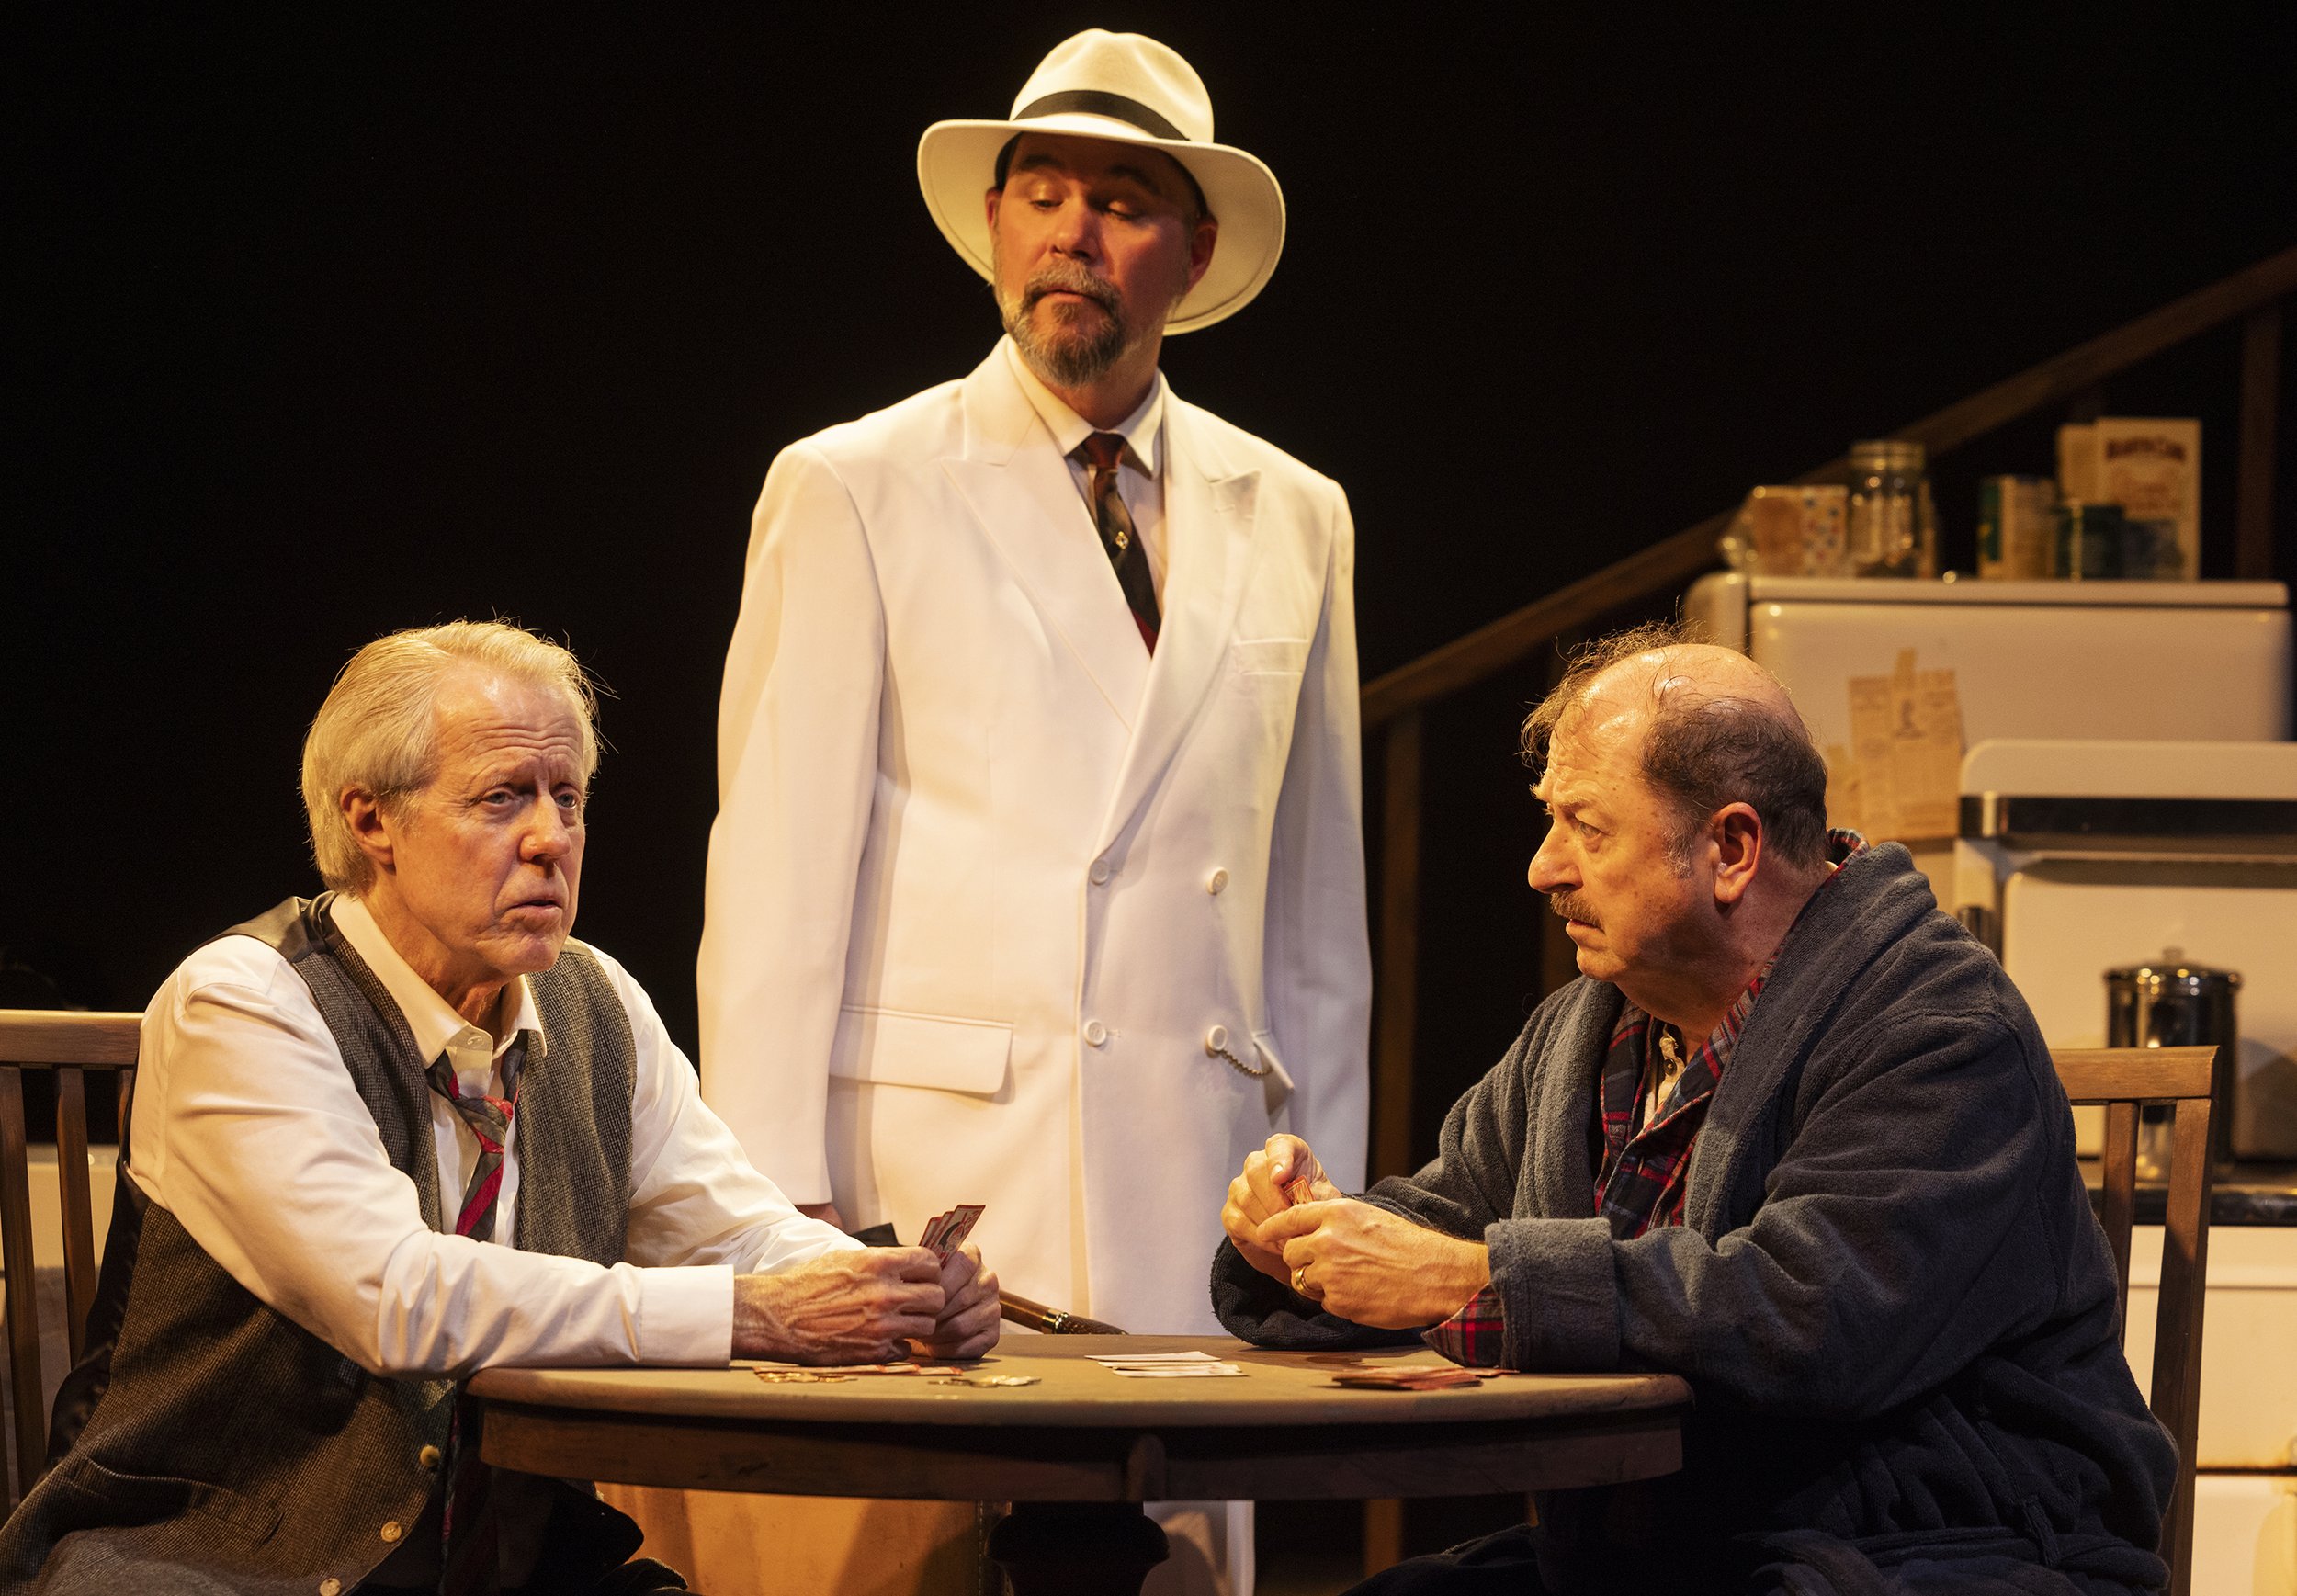 Joseph McGrath as Willy Loman, Christopher Younggren as Uncle Ben and Dennis O’Dell as Charlie. Photo by Tim Fuller.